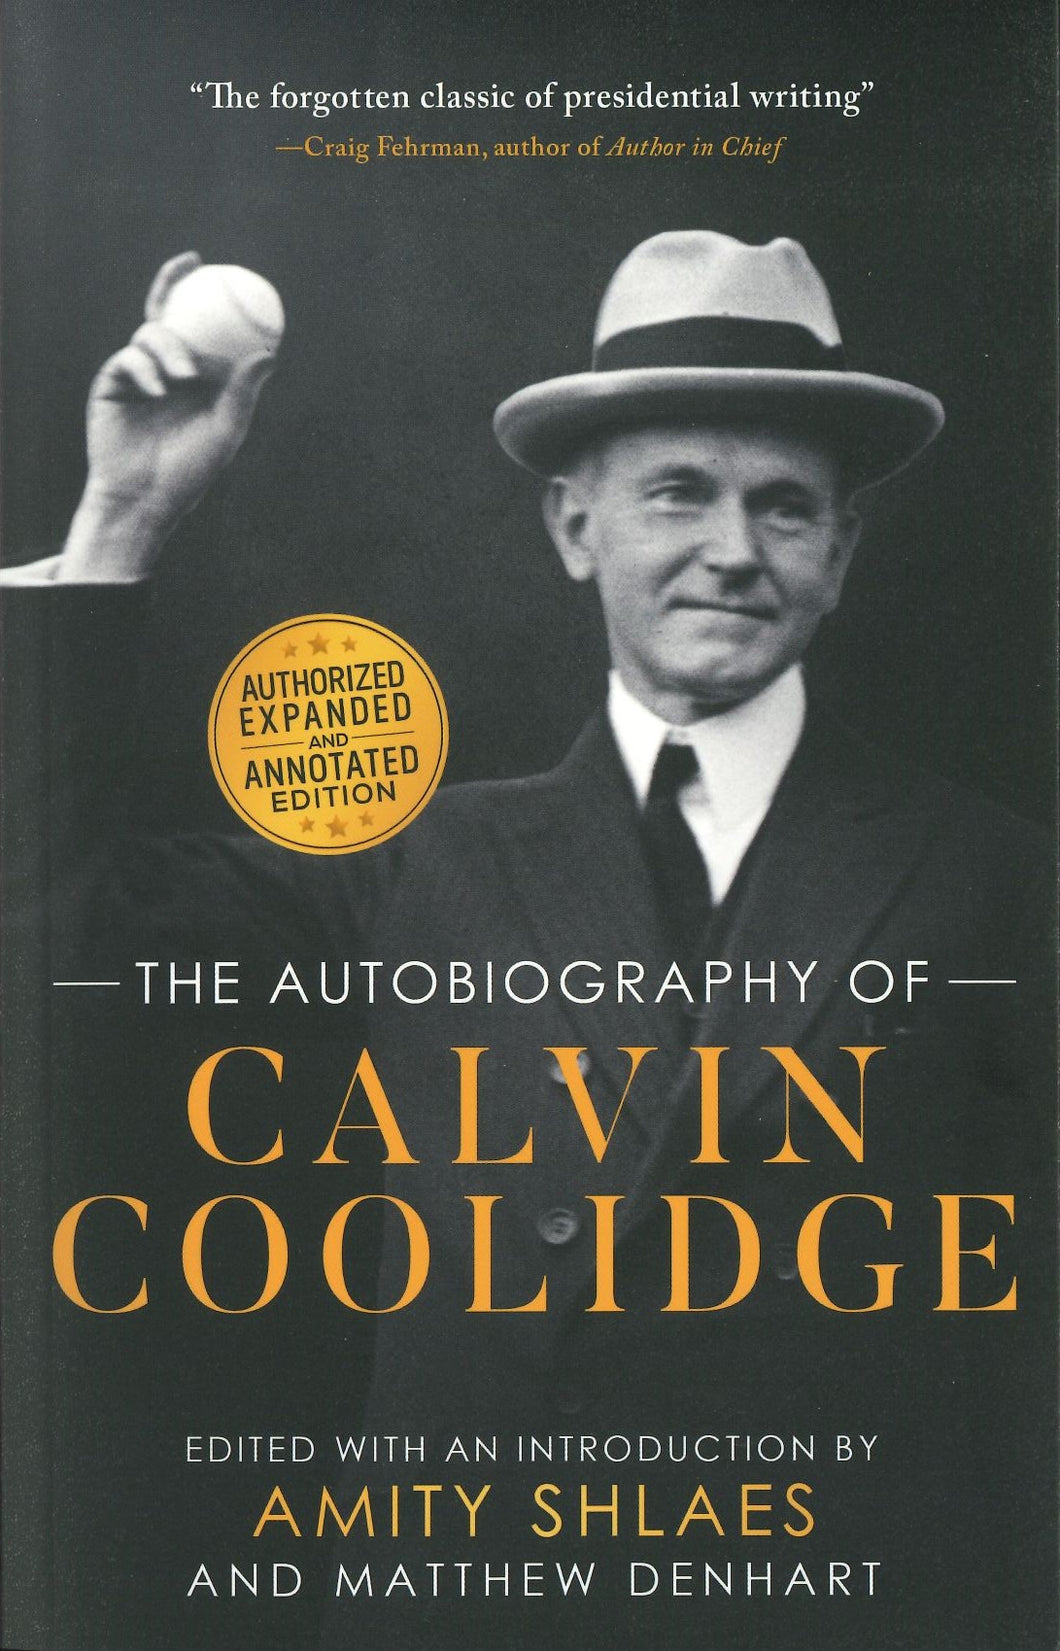 The Autobiography of Calvin Coolidge - Expanded and Annotated Edition